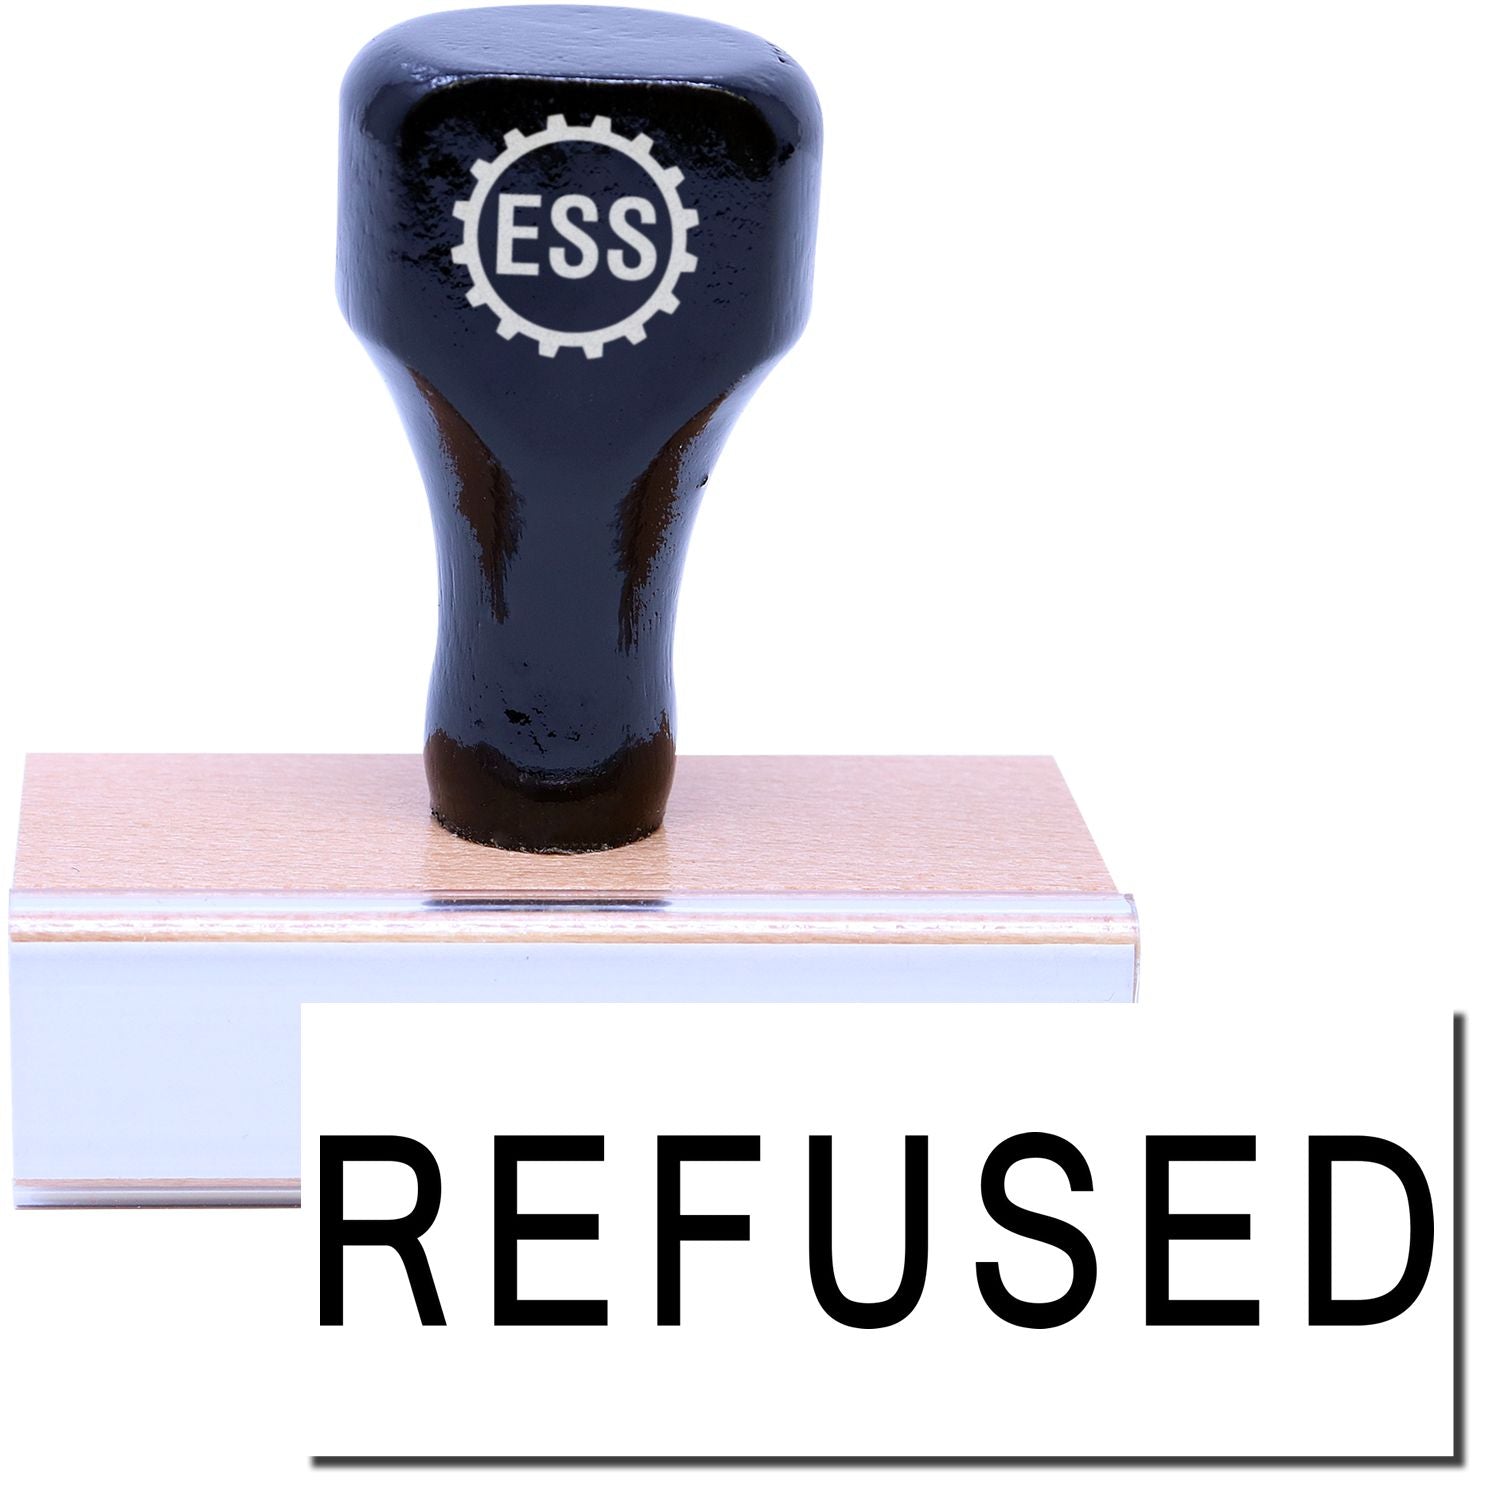 A stock office rubber stamp with a stamped image showing how the text "REFUSED" is displayed after stamping.